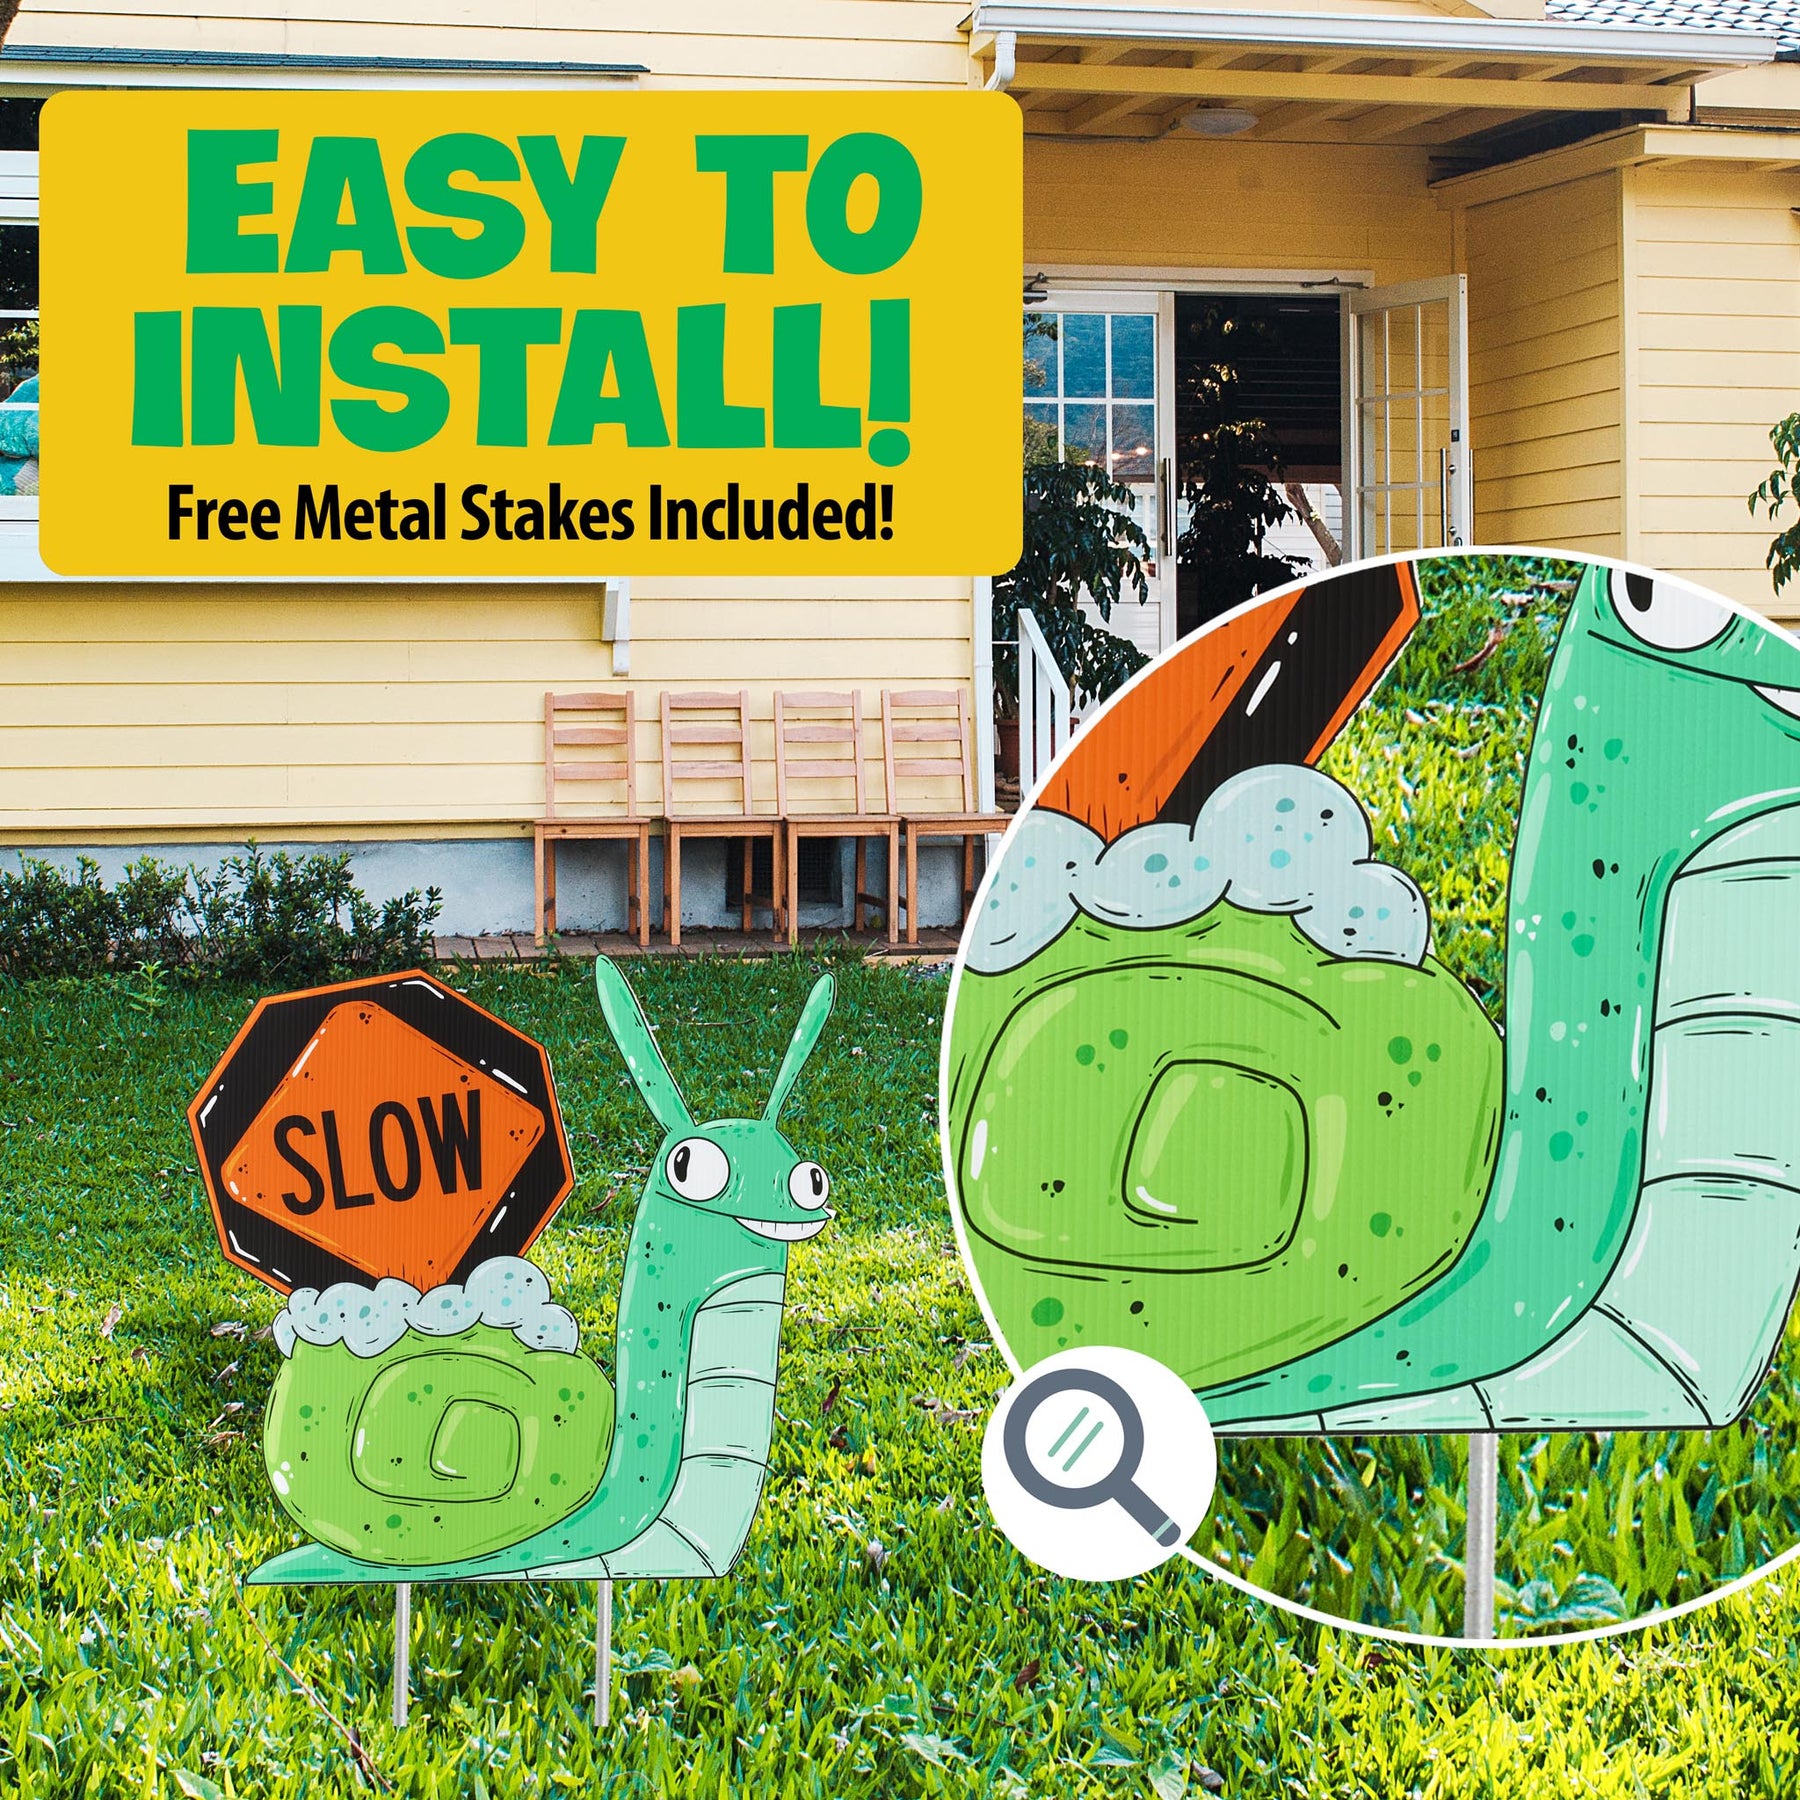 Sonny the Snail | "Slow" Yard Sign